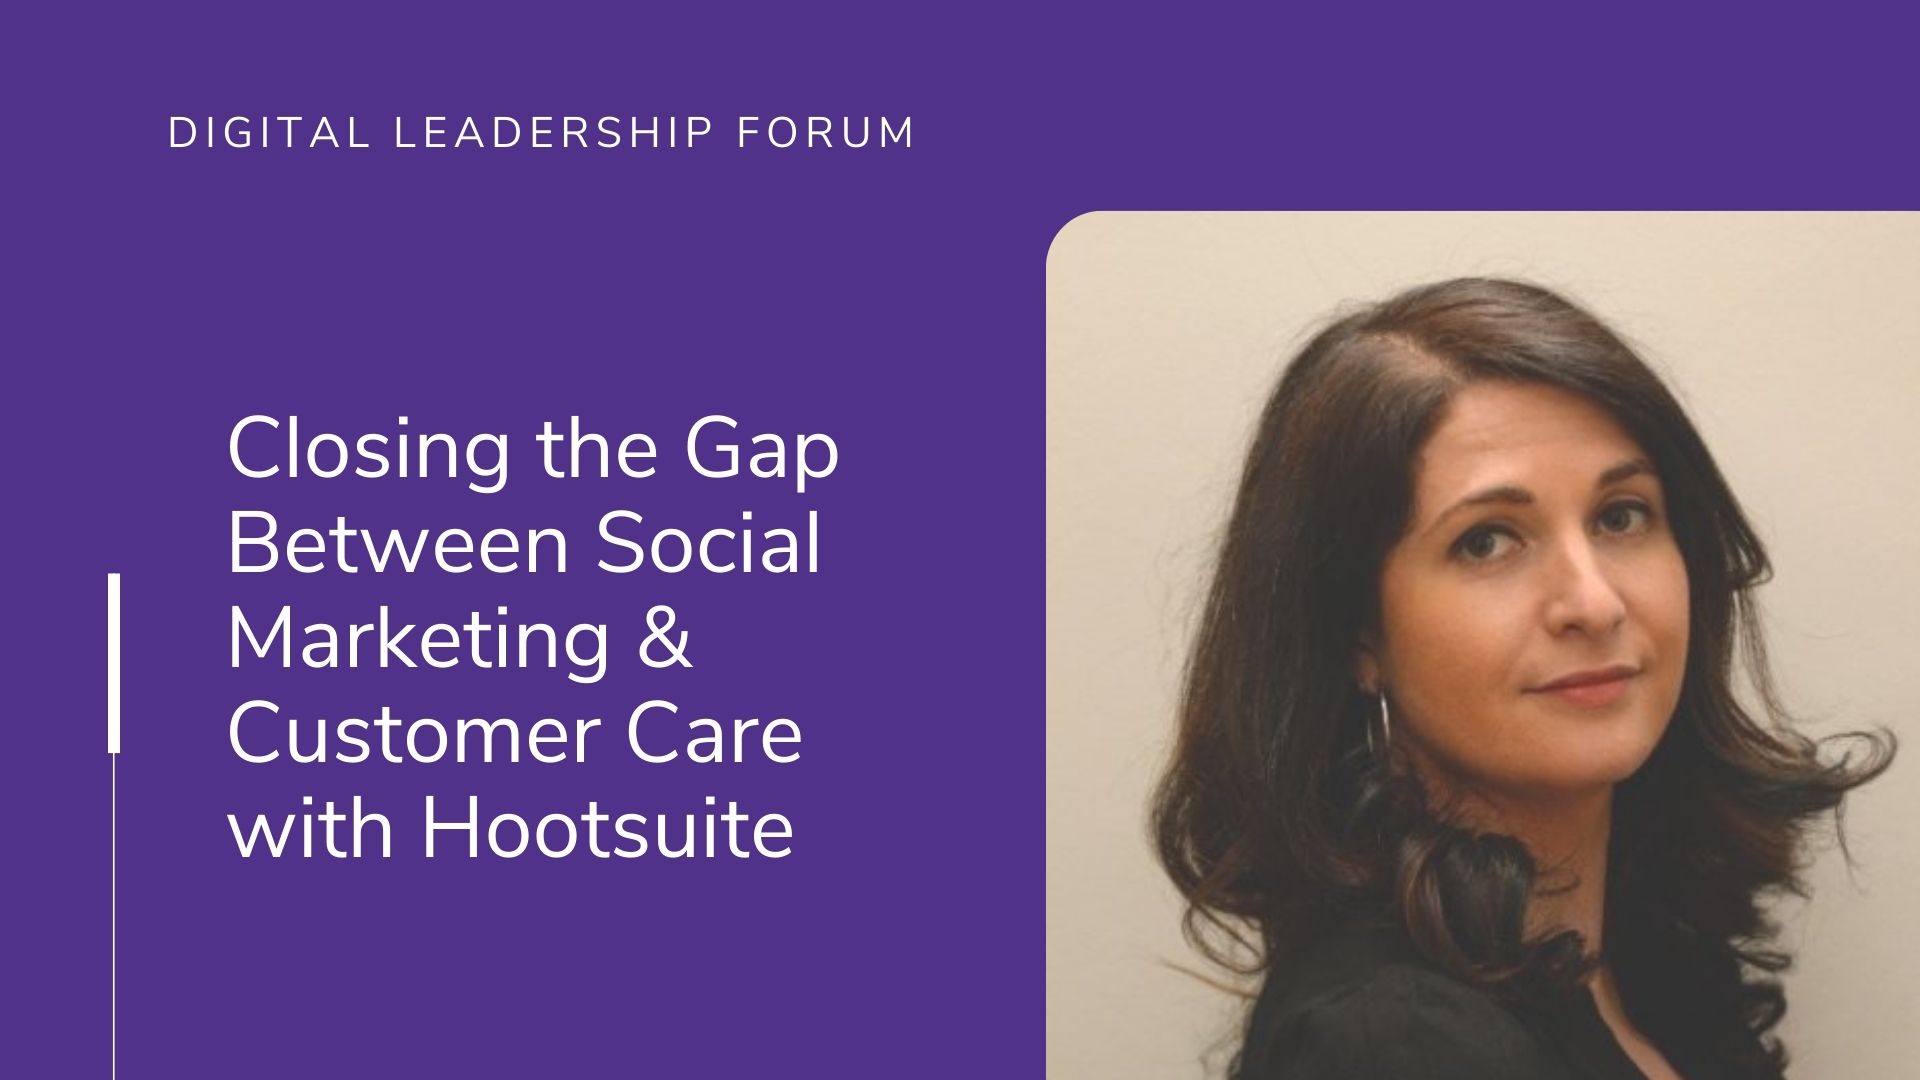 Video: Closing the Gap Between Social Marketing & Customer Care with Hootsuite